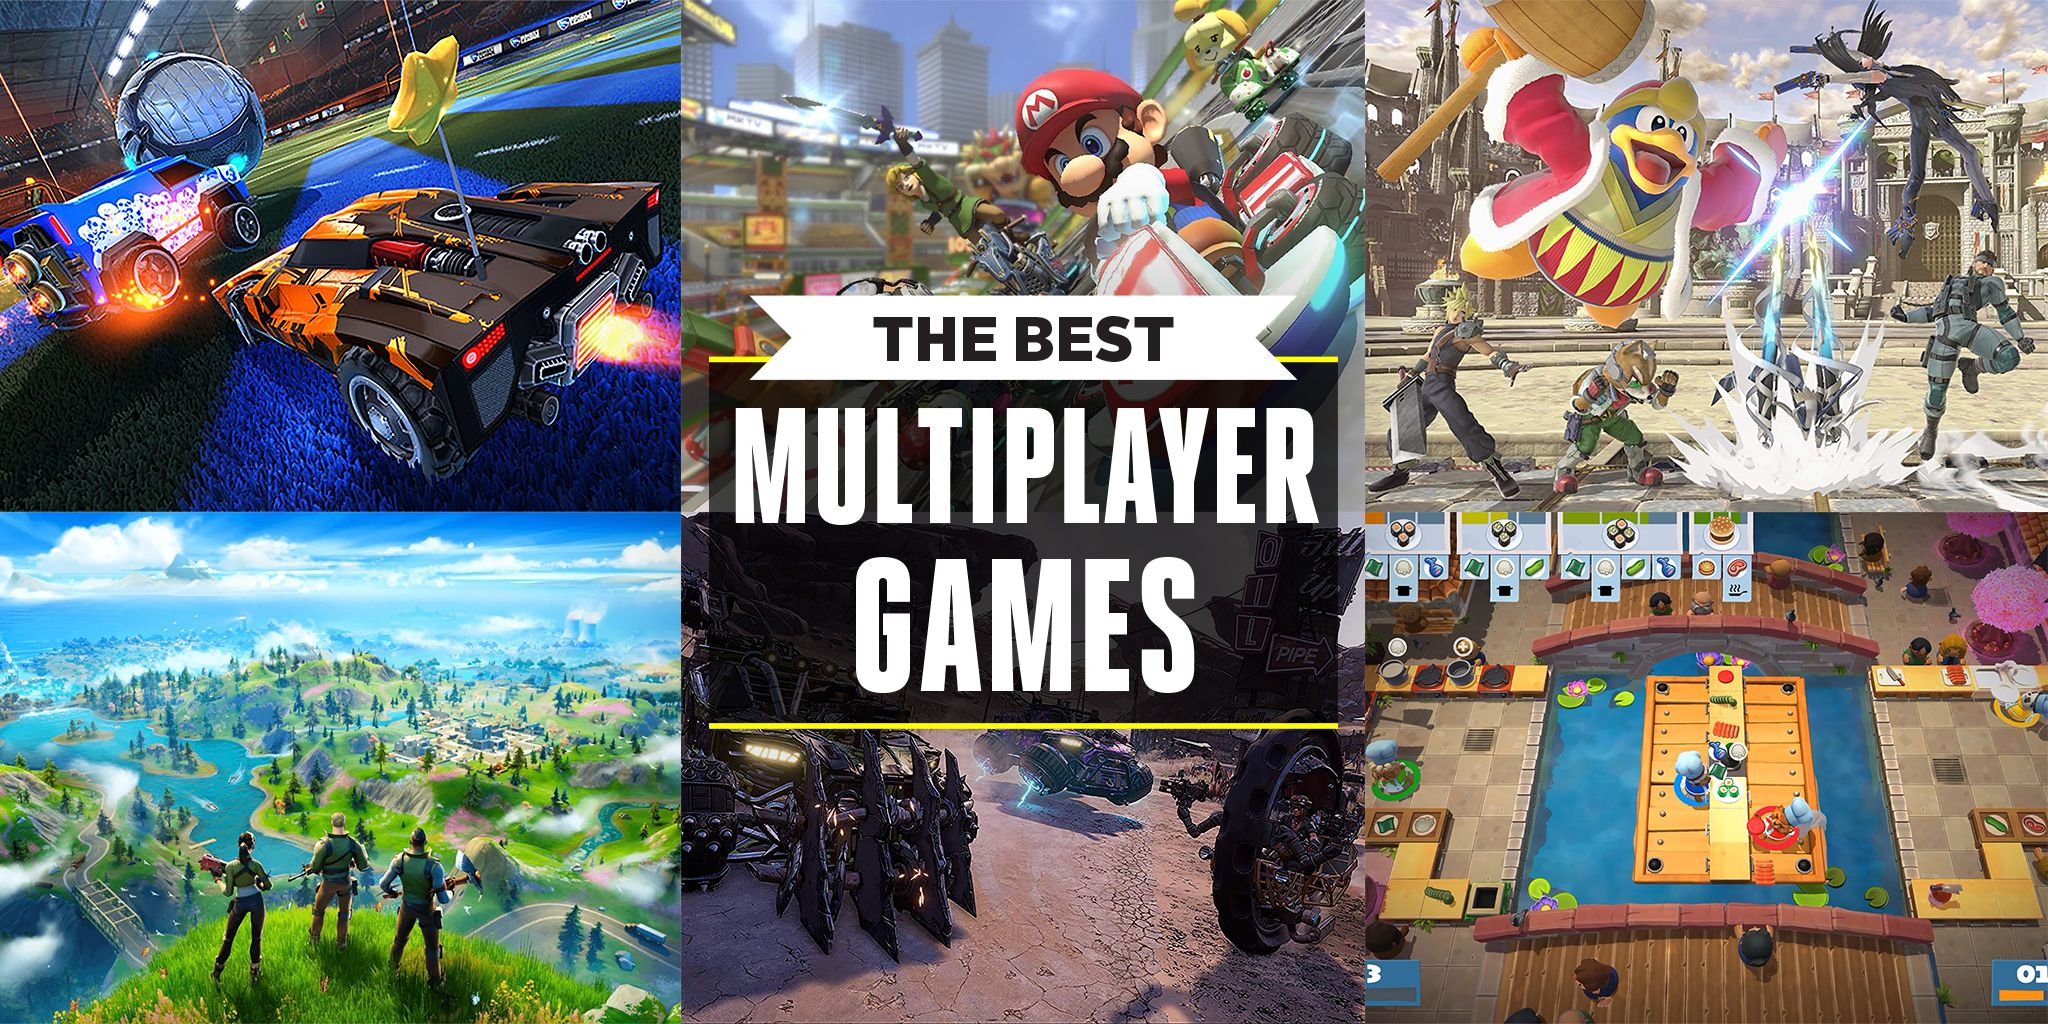 Best multiplayer games to play in a web browser